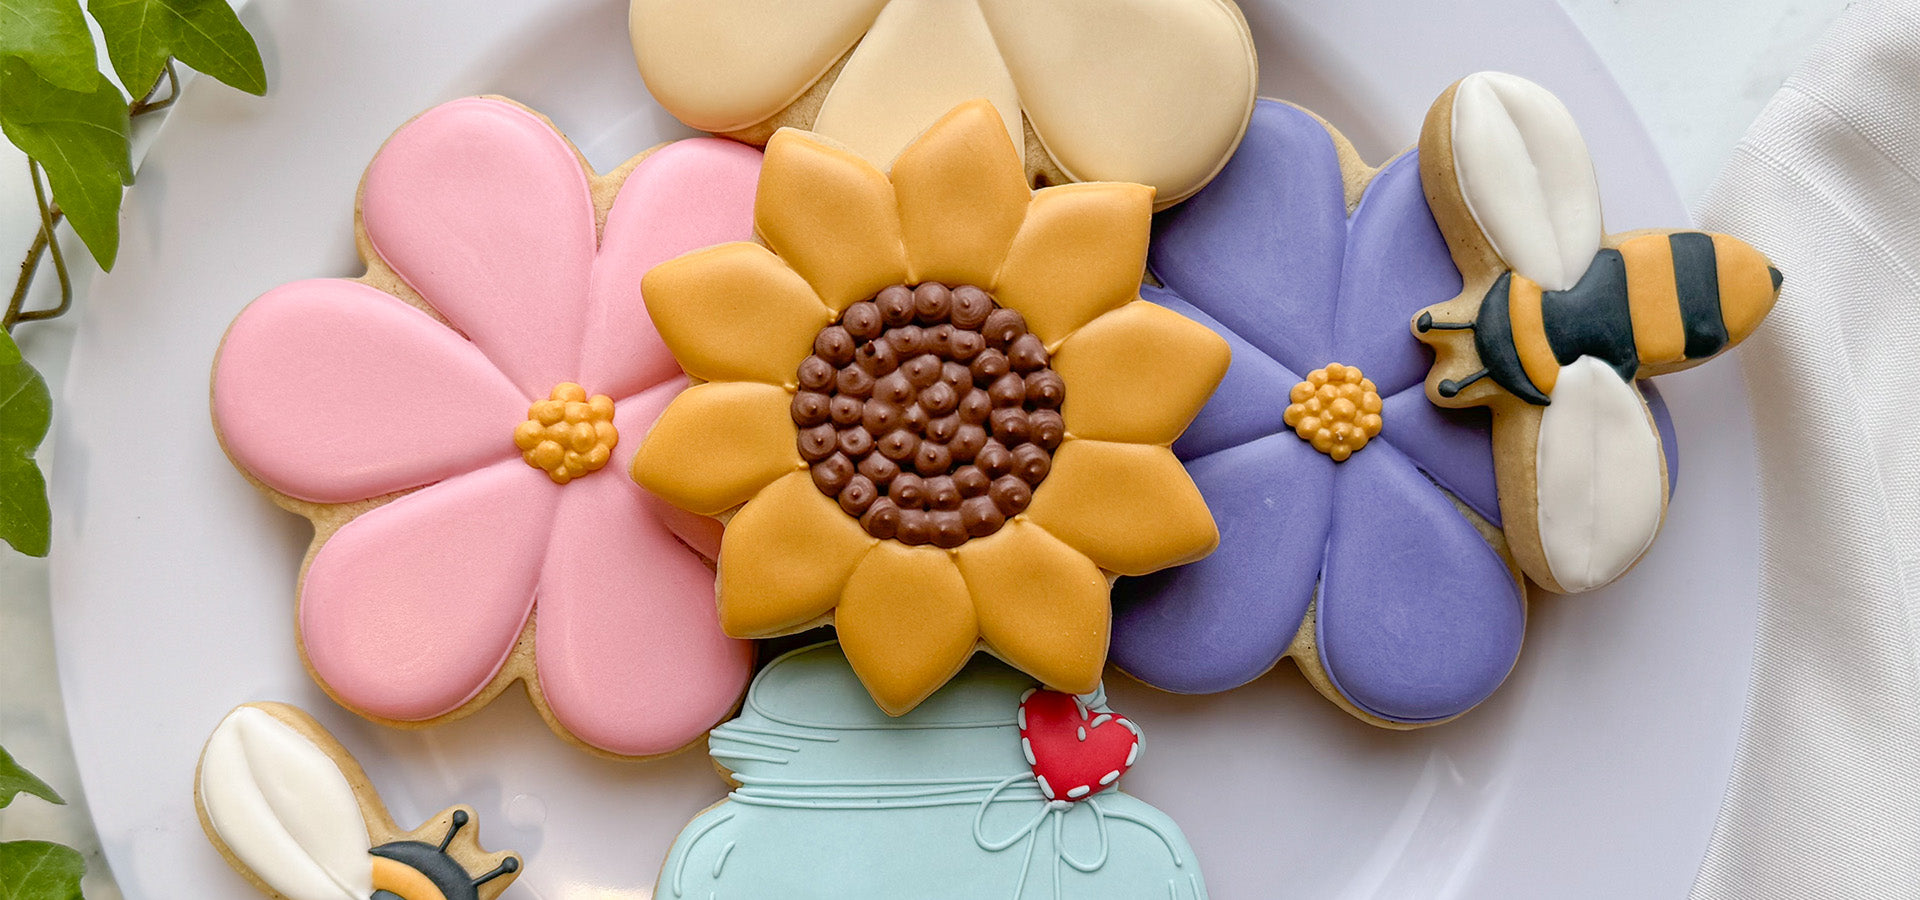 Flower, bee, and jar cookies on a white plate